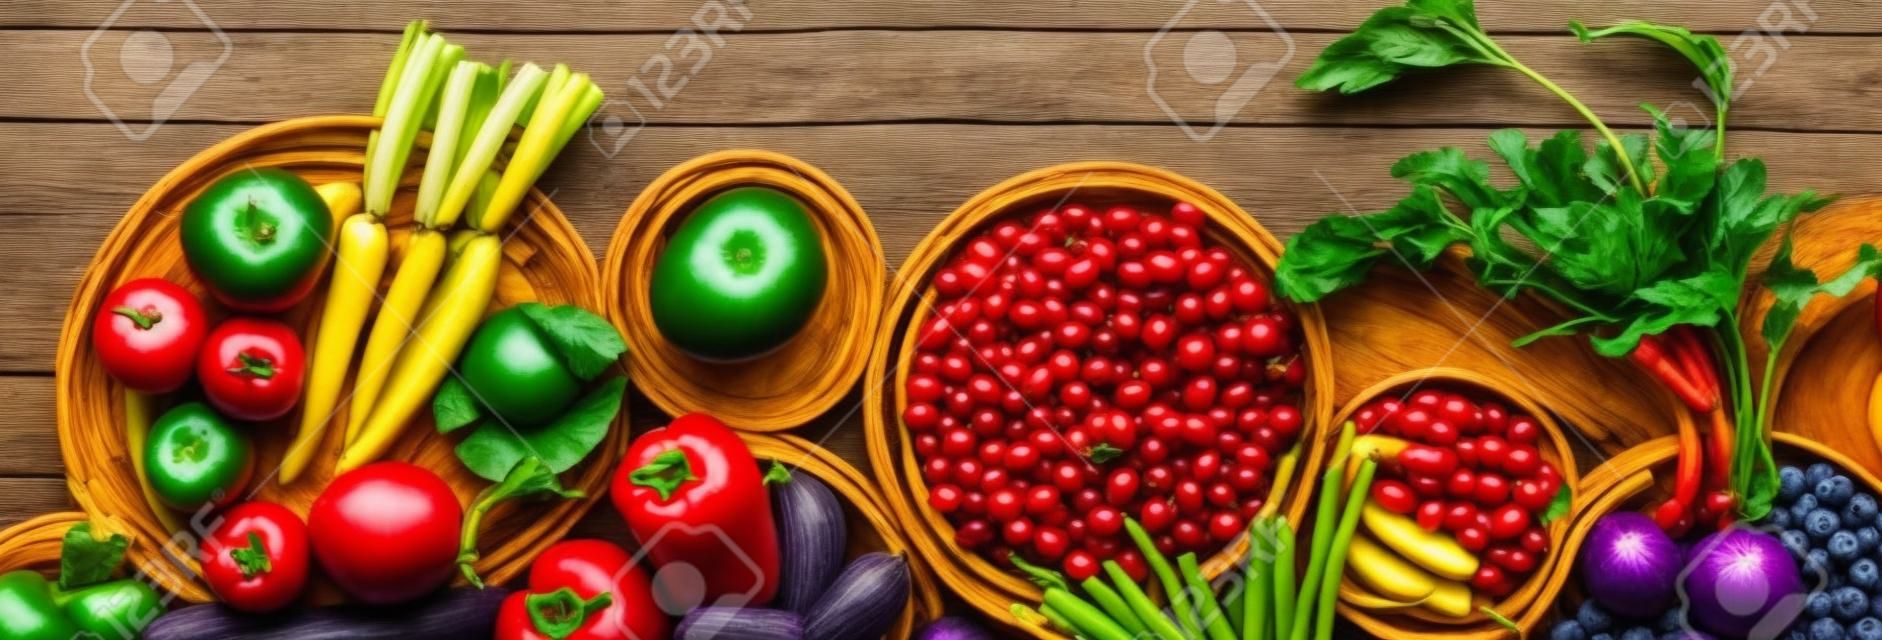 Narrow view of fresh fruits and vegetables in rainbow colours against a dark wooden background.